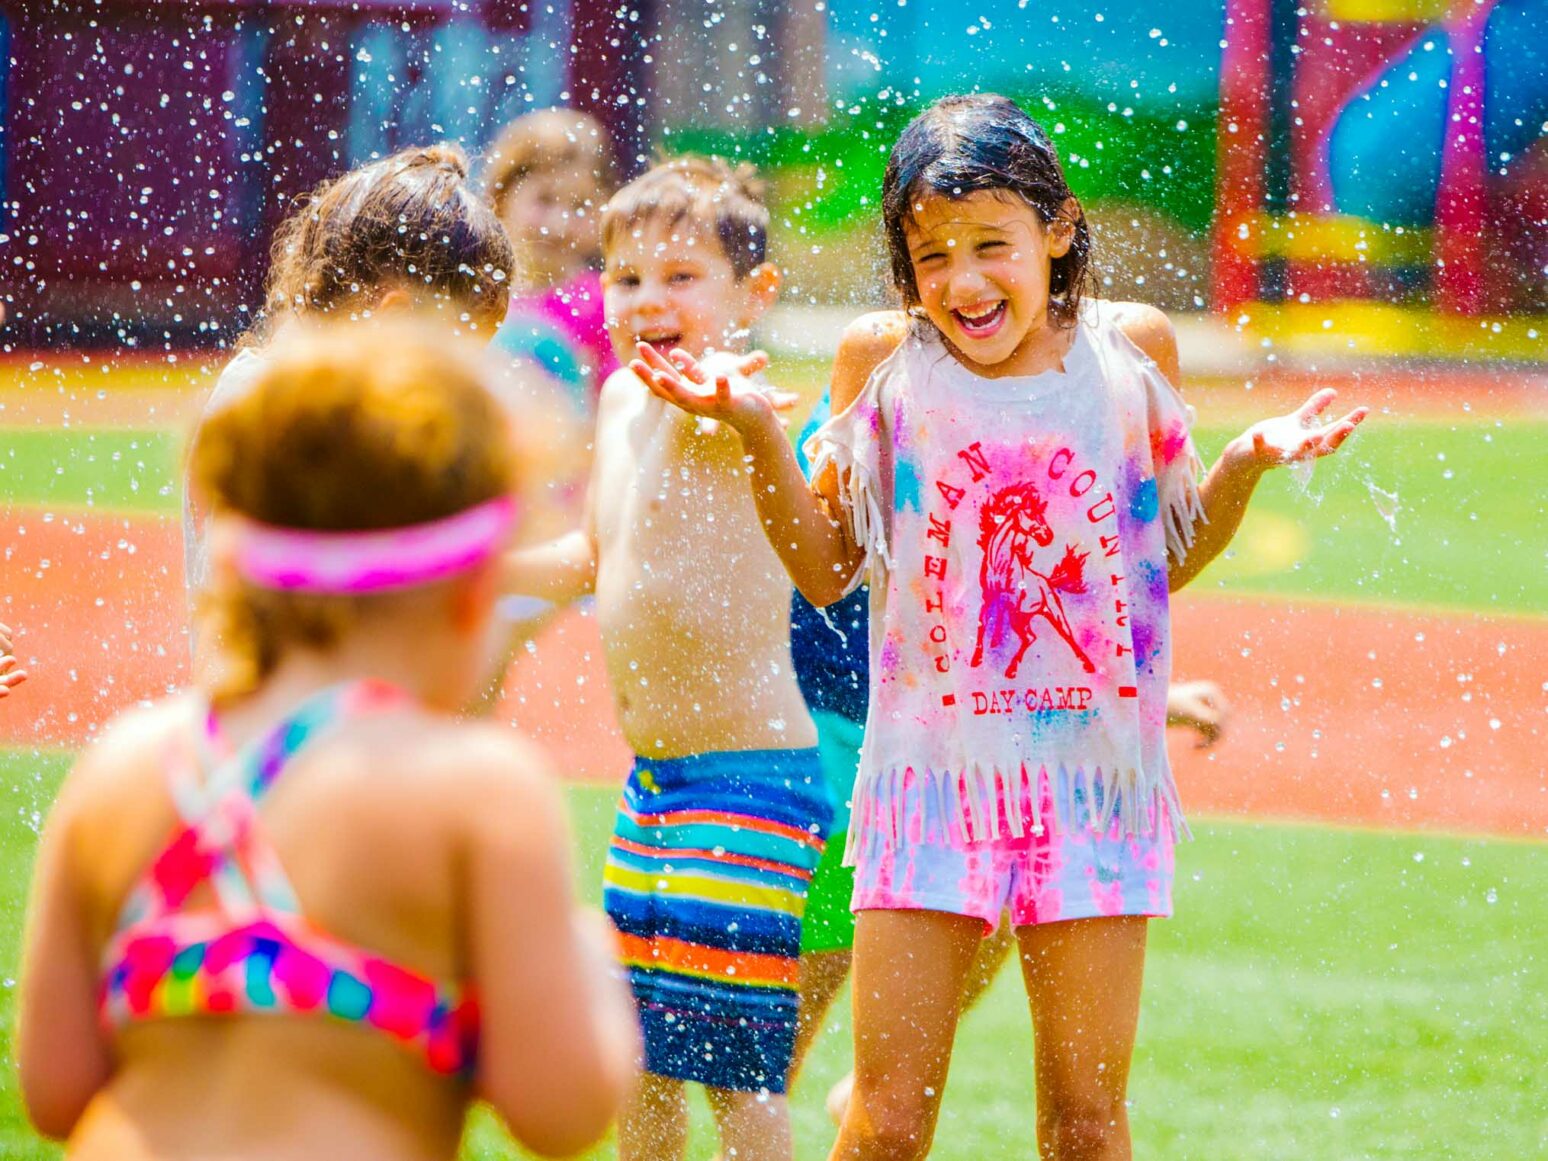 Smiling campers play in water spray